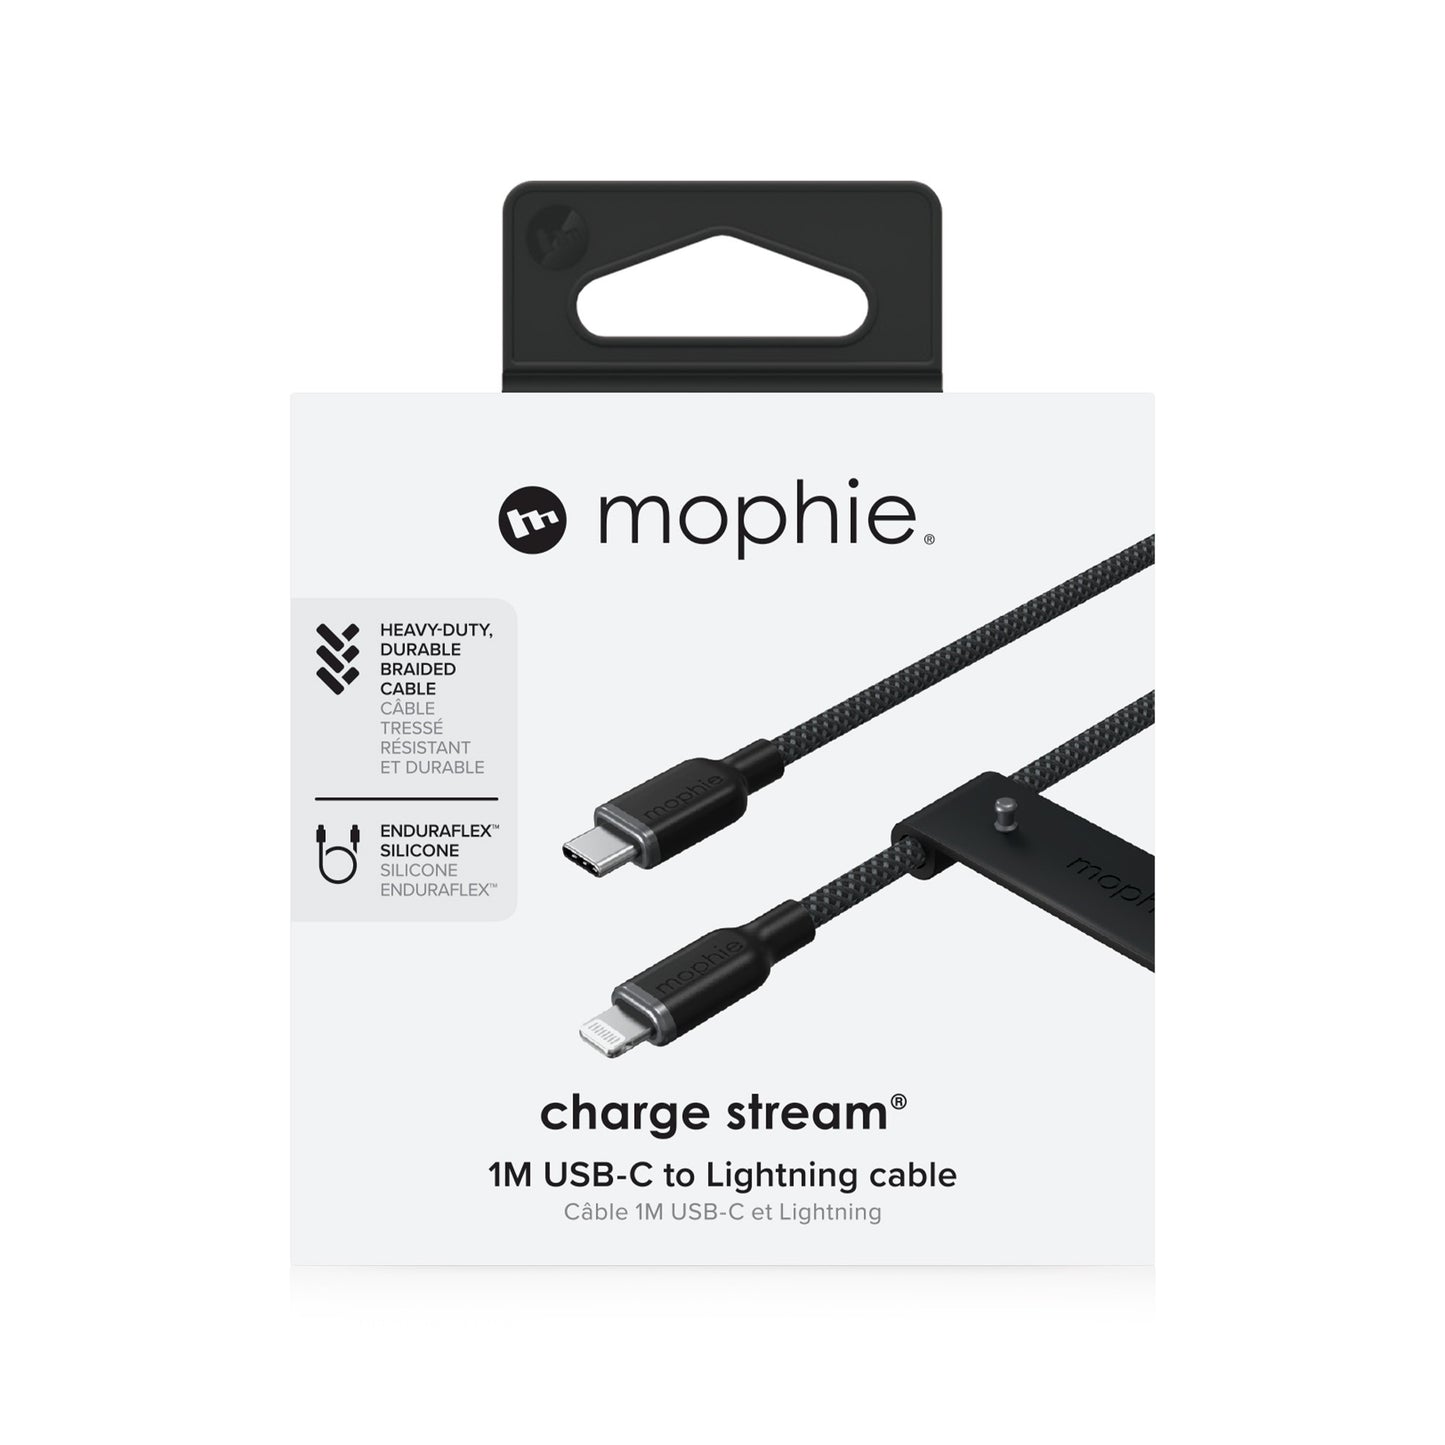 Mophie 100cm USB-C to Lightning Charge and Sync Cable - Black - 15-12591